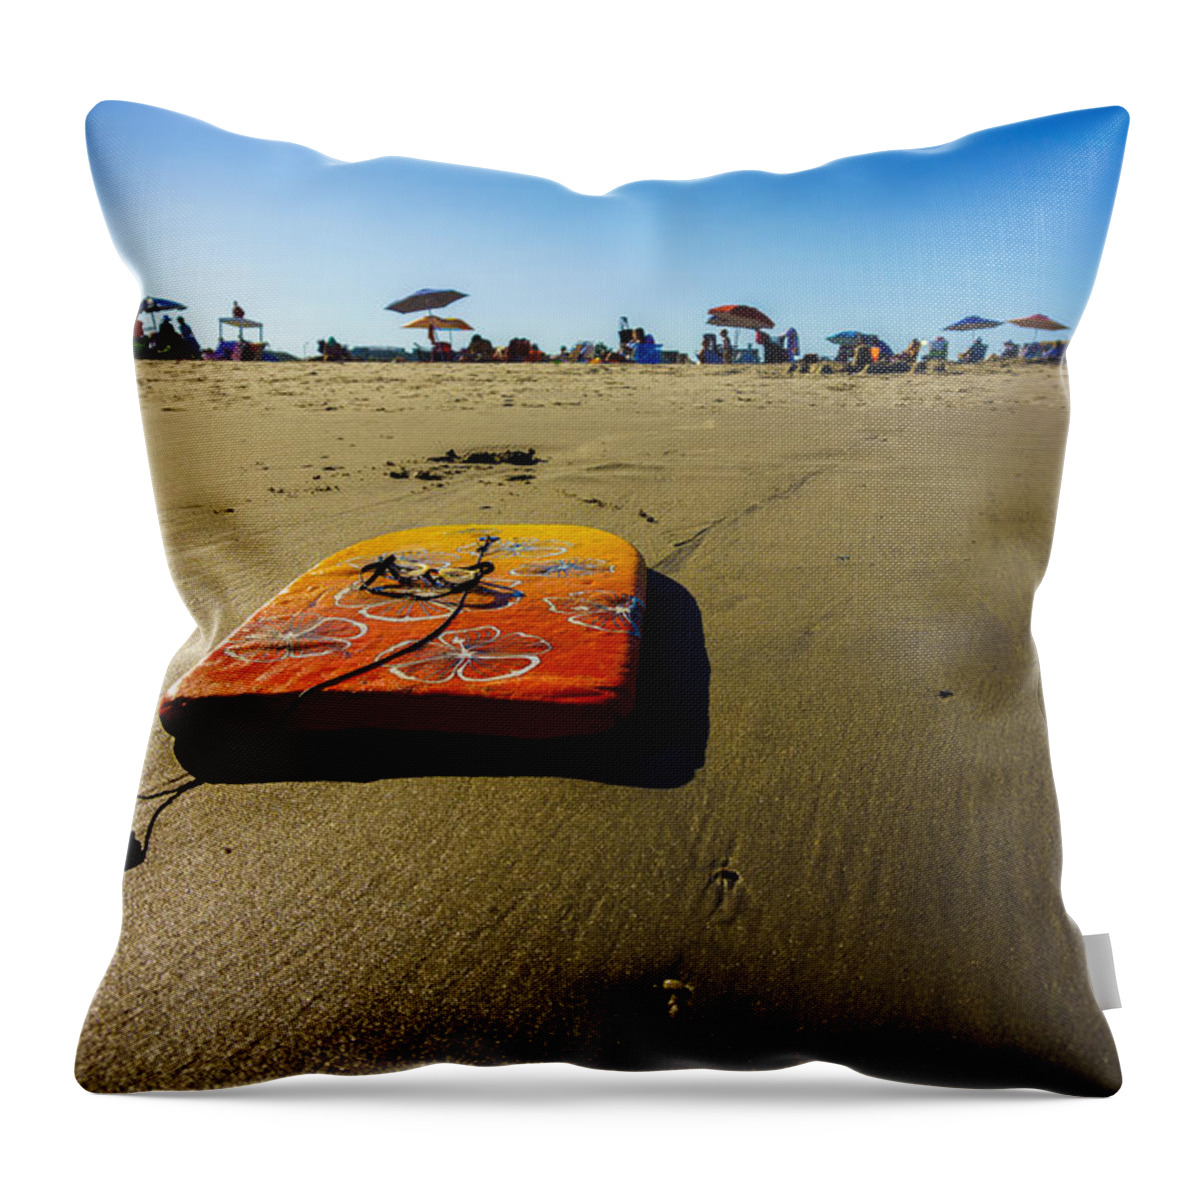 Ocean City Throw Pillow featuring the photograph Summer Fun in Ocean City by Mark Rogers